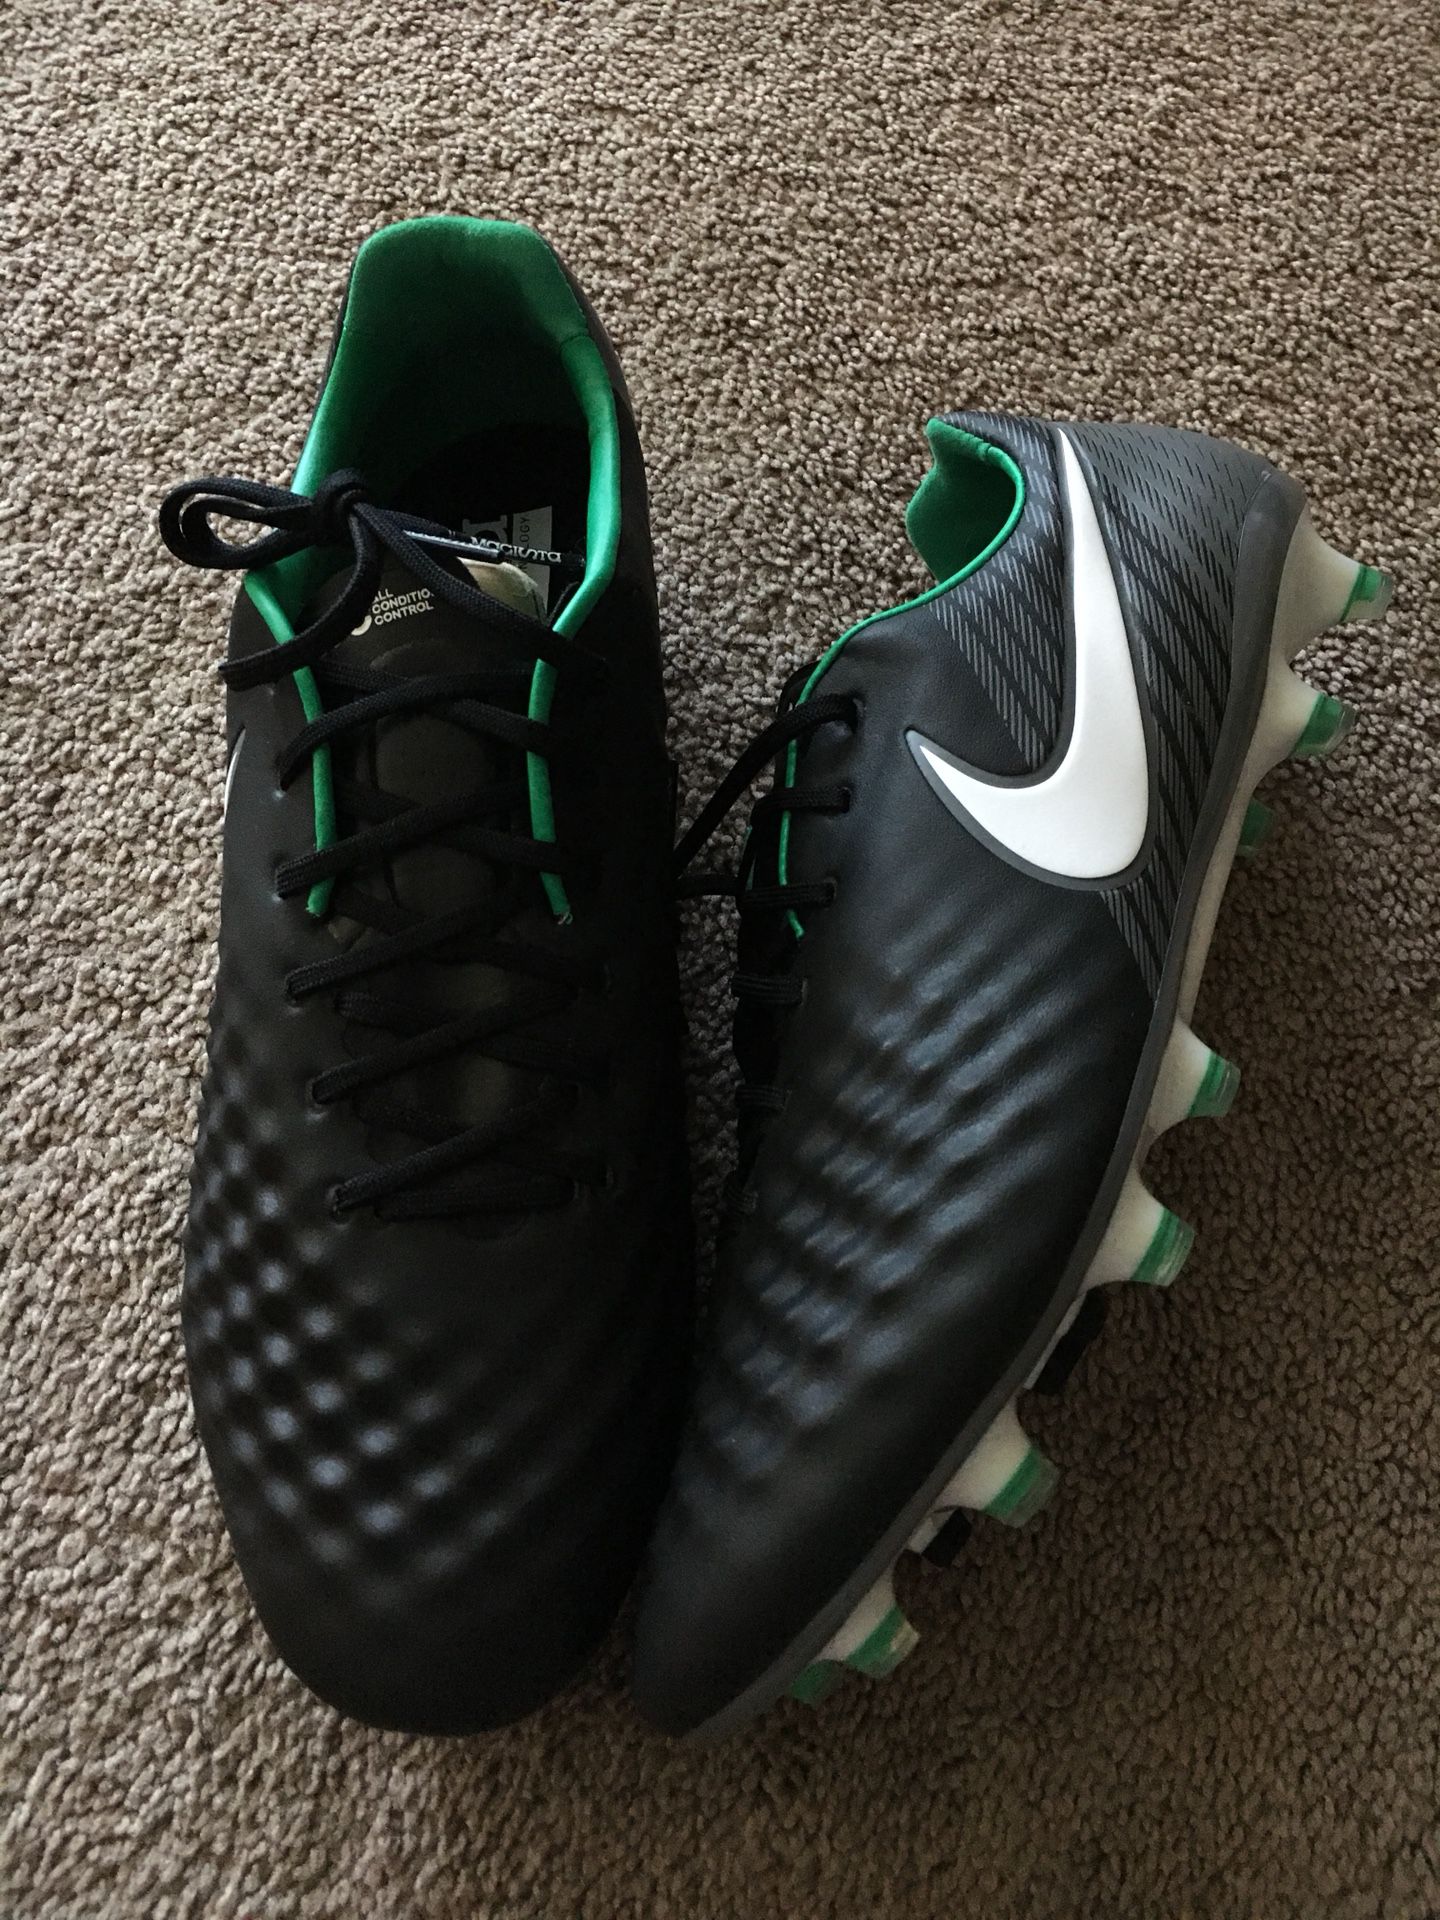 Brand new pair Nike soccer ACC fifa magista FG (firm ground) cleat